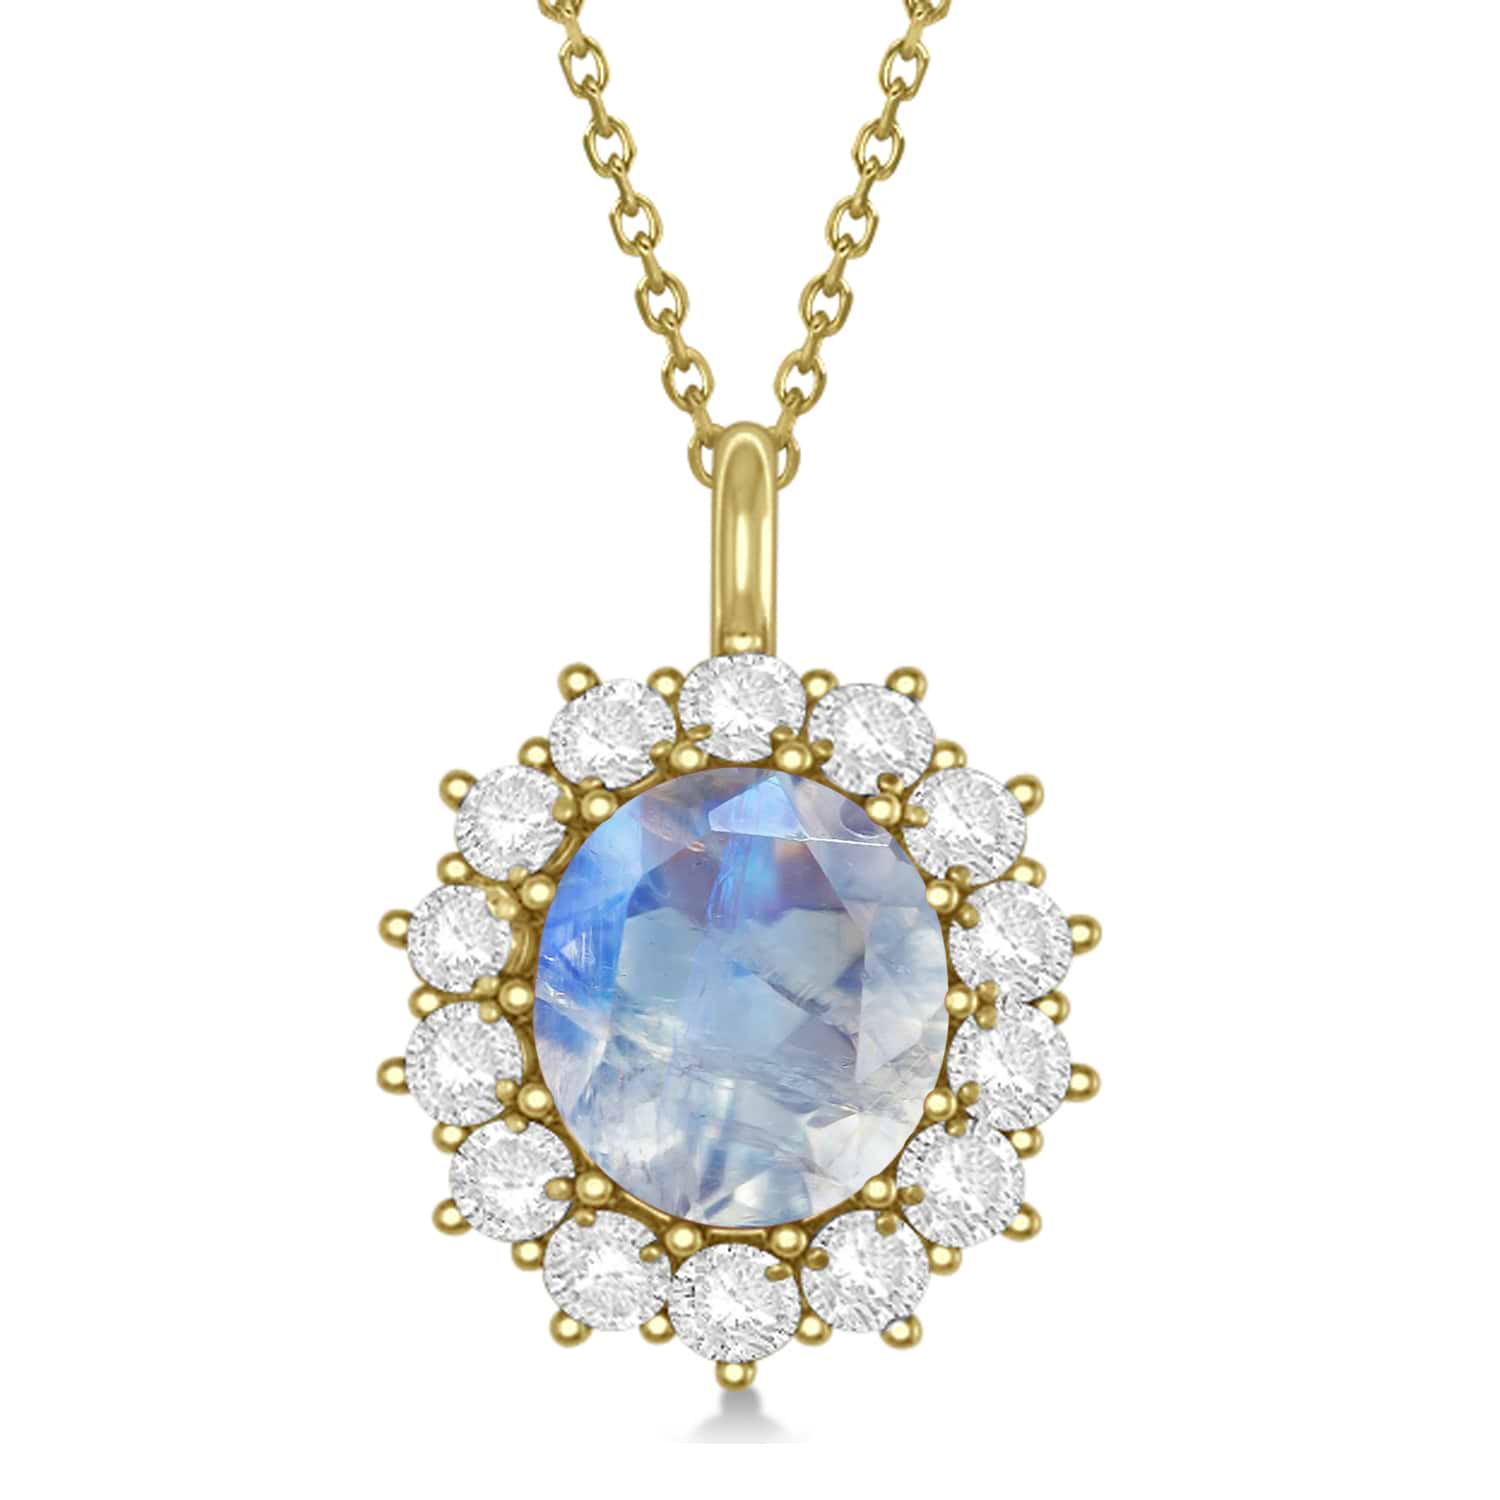 Oval Moonstone and Diamond Pendant Necklace 14k Yellow Gold (5.40ctw)